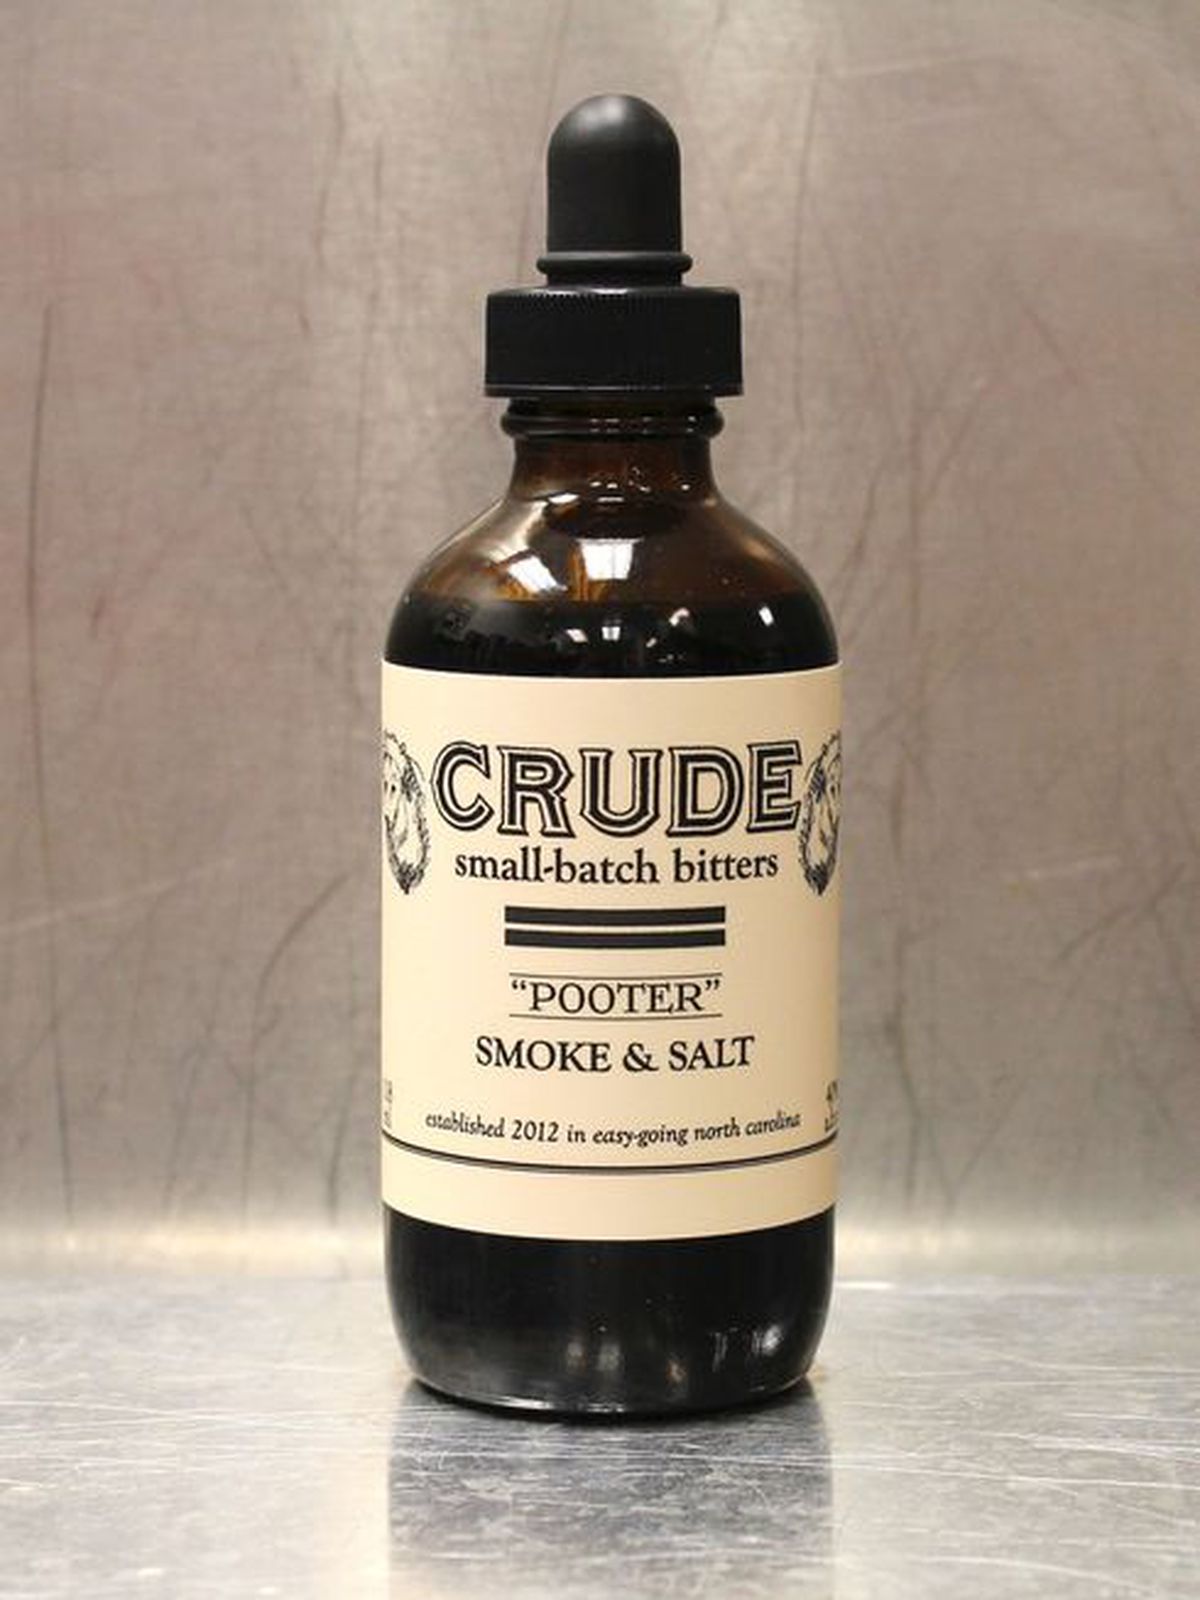 A bottle of Crude bitters